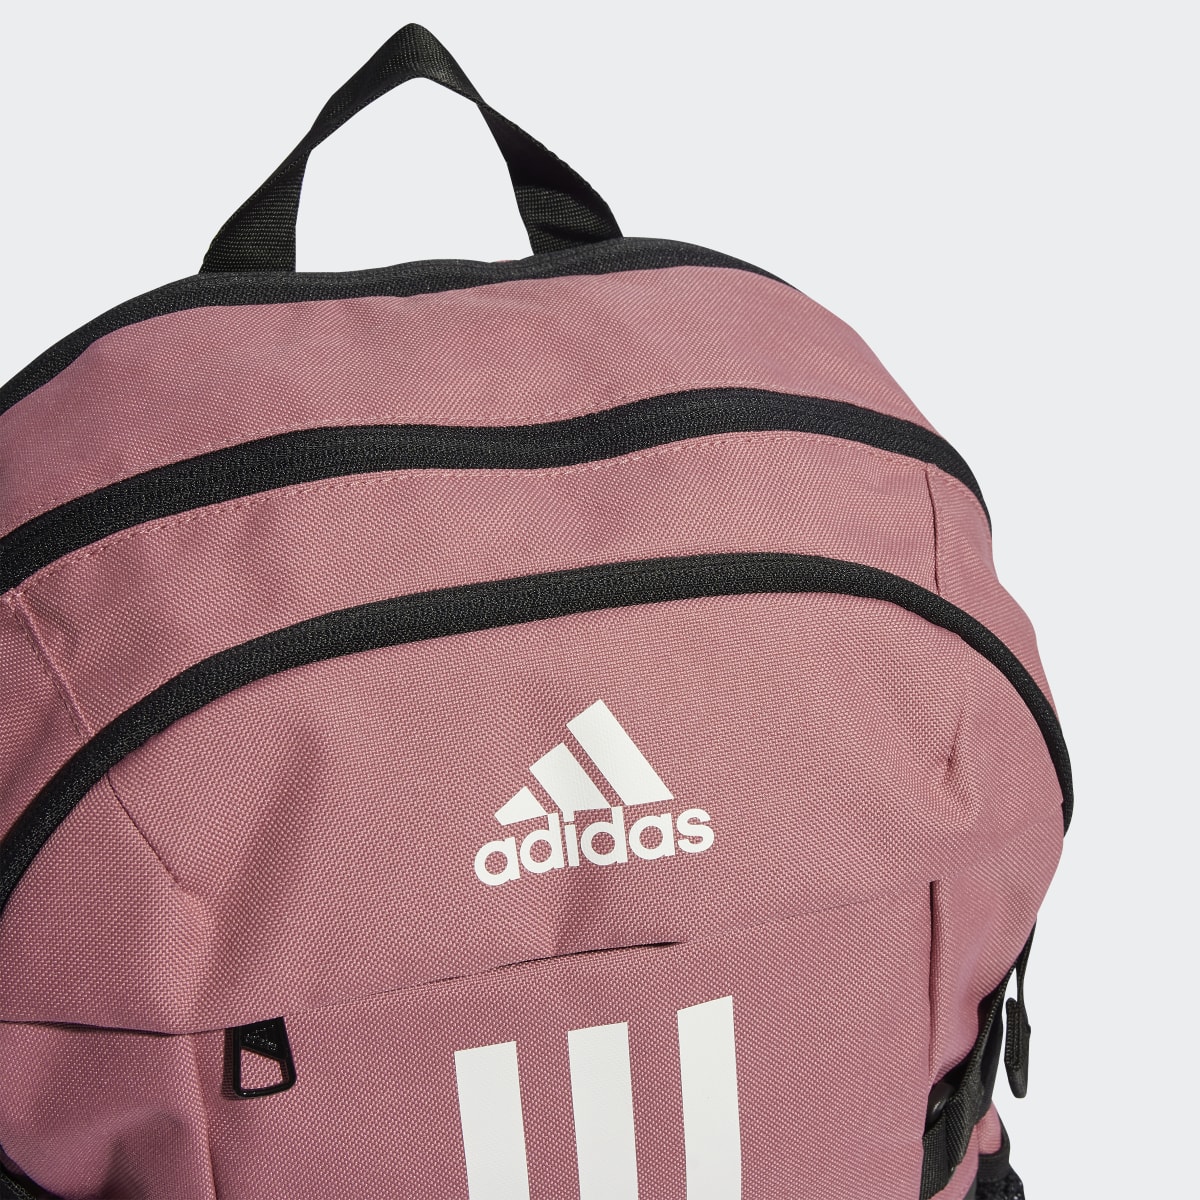 Adidas Power Backpack. 7